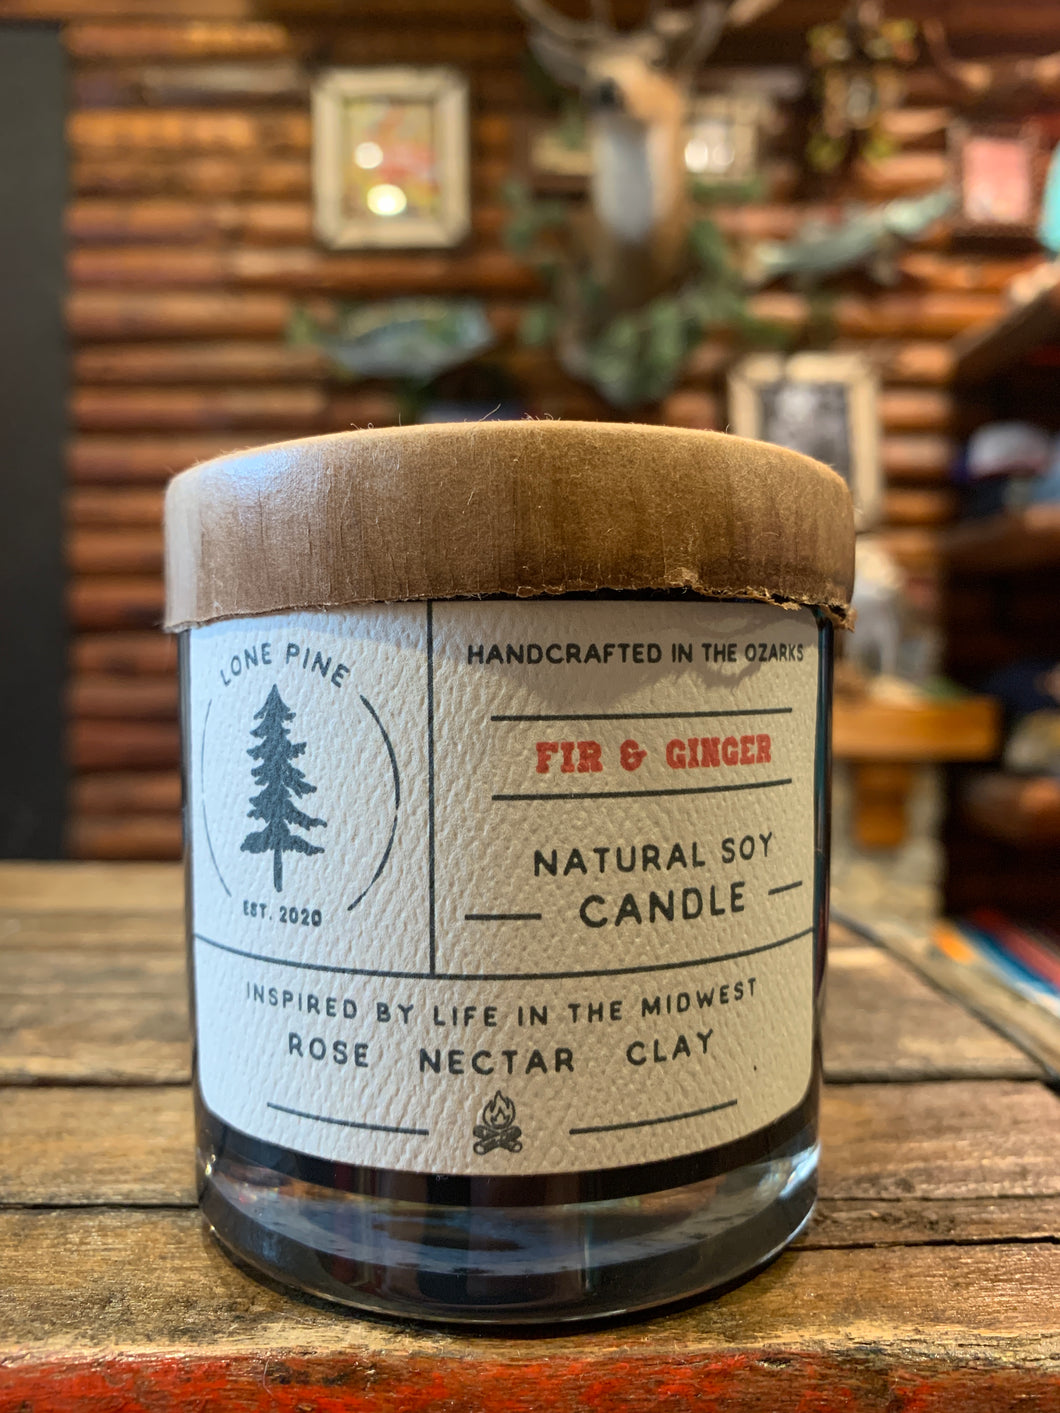 American Heritage Fir & Ginger Soy Candle, USA